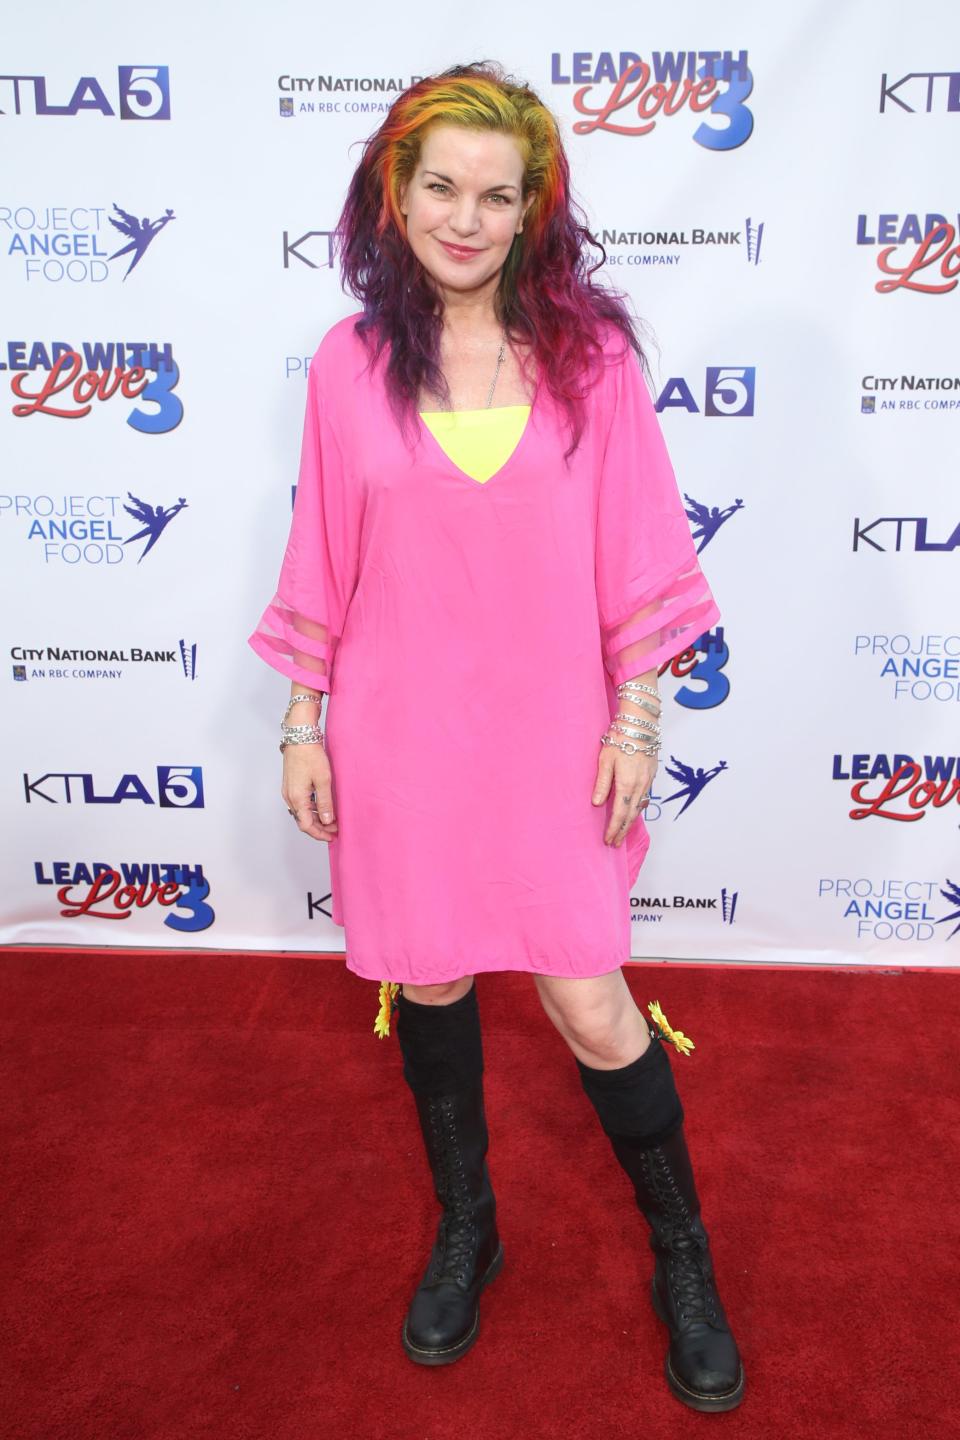 Pauley Perrette attends Project Angel Food's Lead with Love 3, a fundraising special on KTLA, on July 23, 2022, in Los Angeles. The former "NCIS" star recently revealed she suffered a "massive stroke" last September.